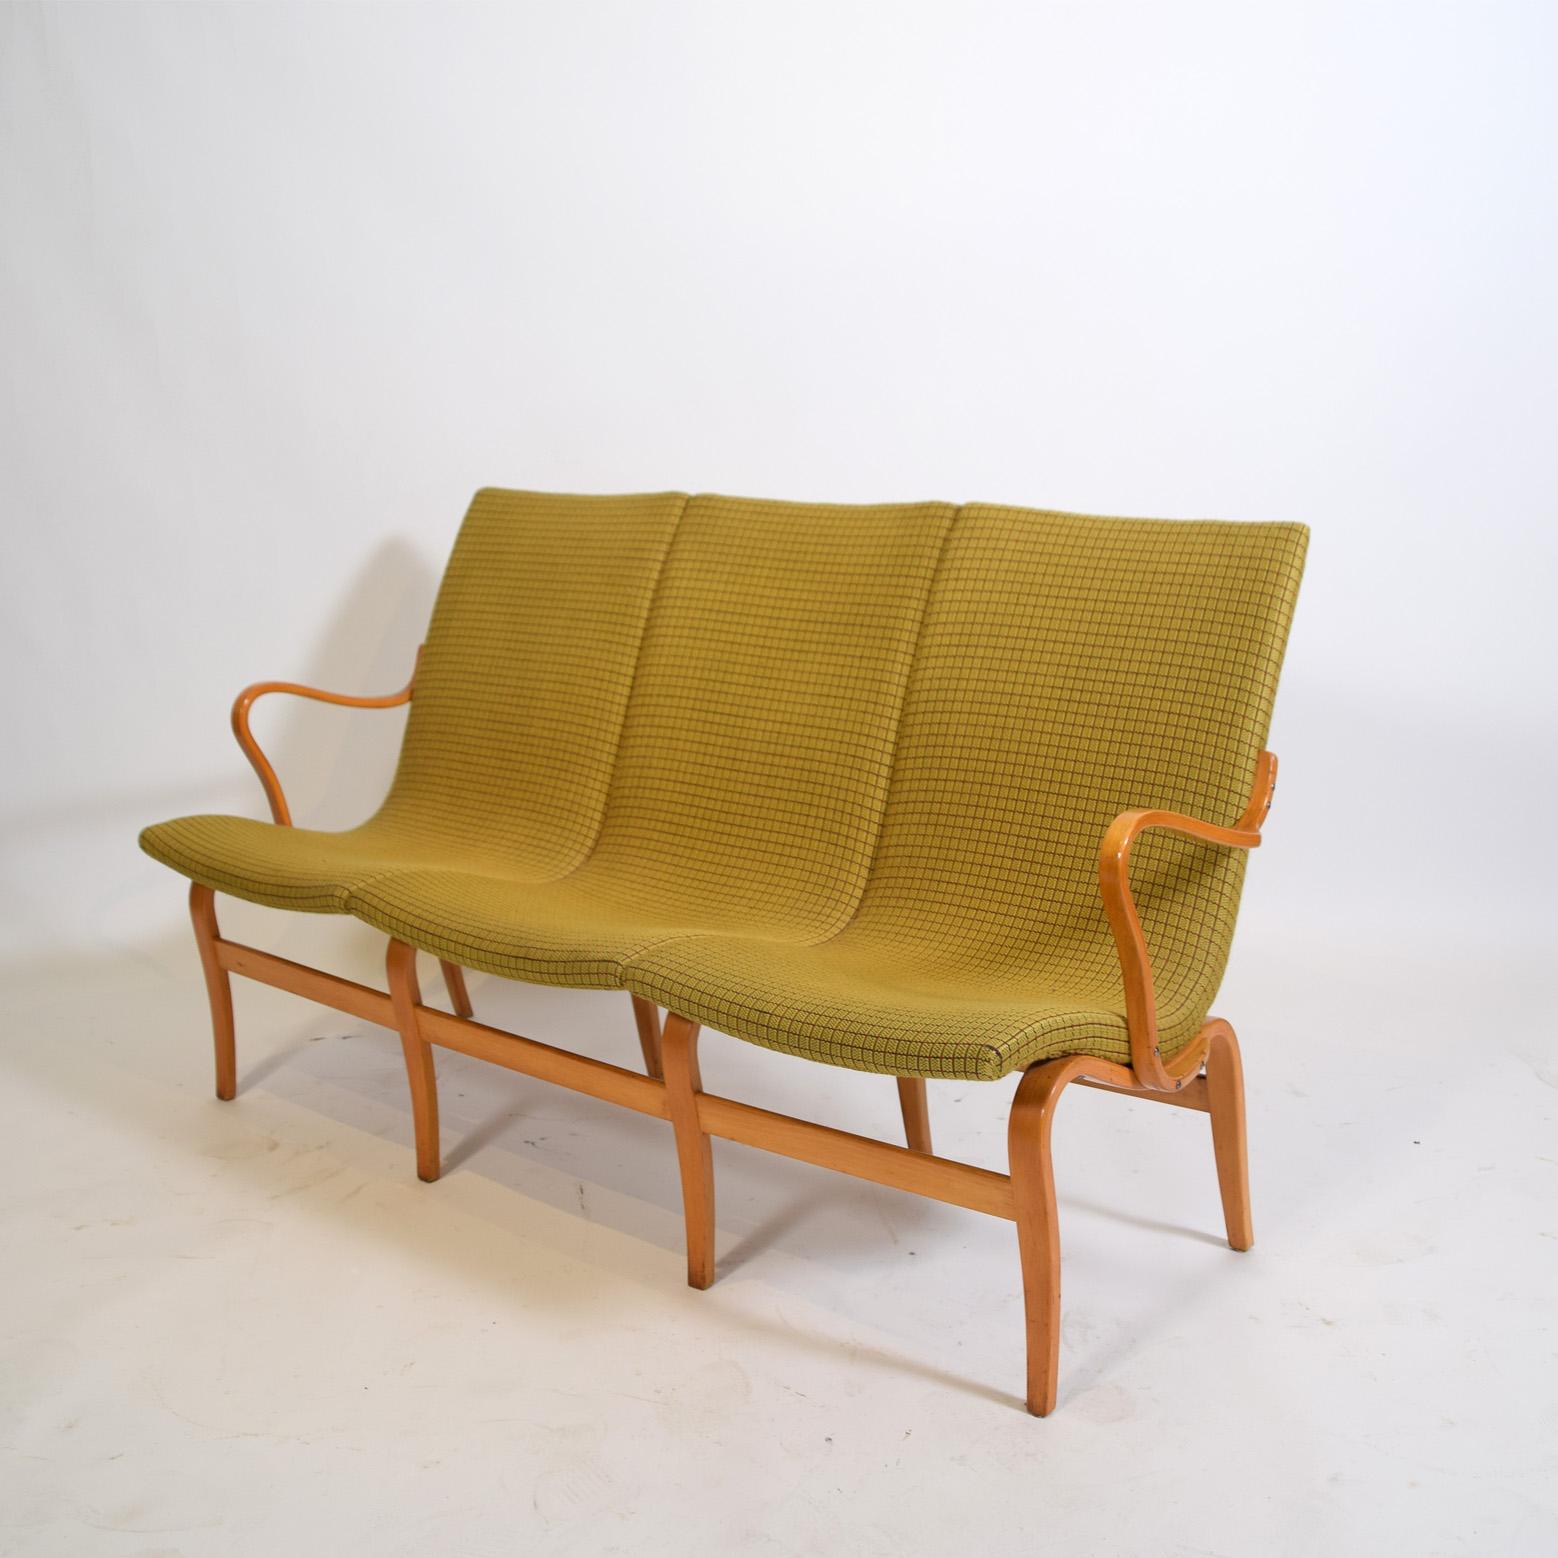 Bruno Mathsson (1907-1988) is one of Sweden's most prominent furniture designers. Having a father who worked as a master carpenter, Mathsson learned about furniture carpentry at an early age, which he later benefited from in his profession as a